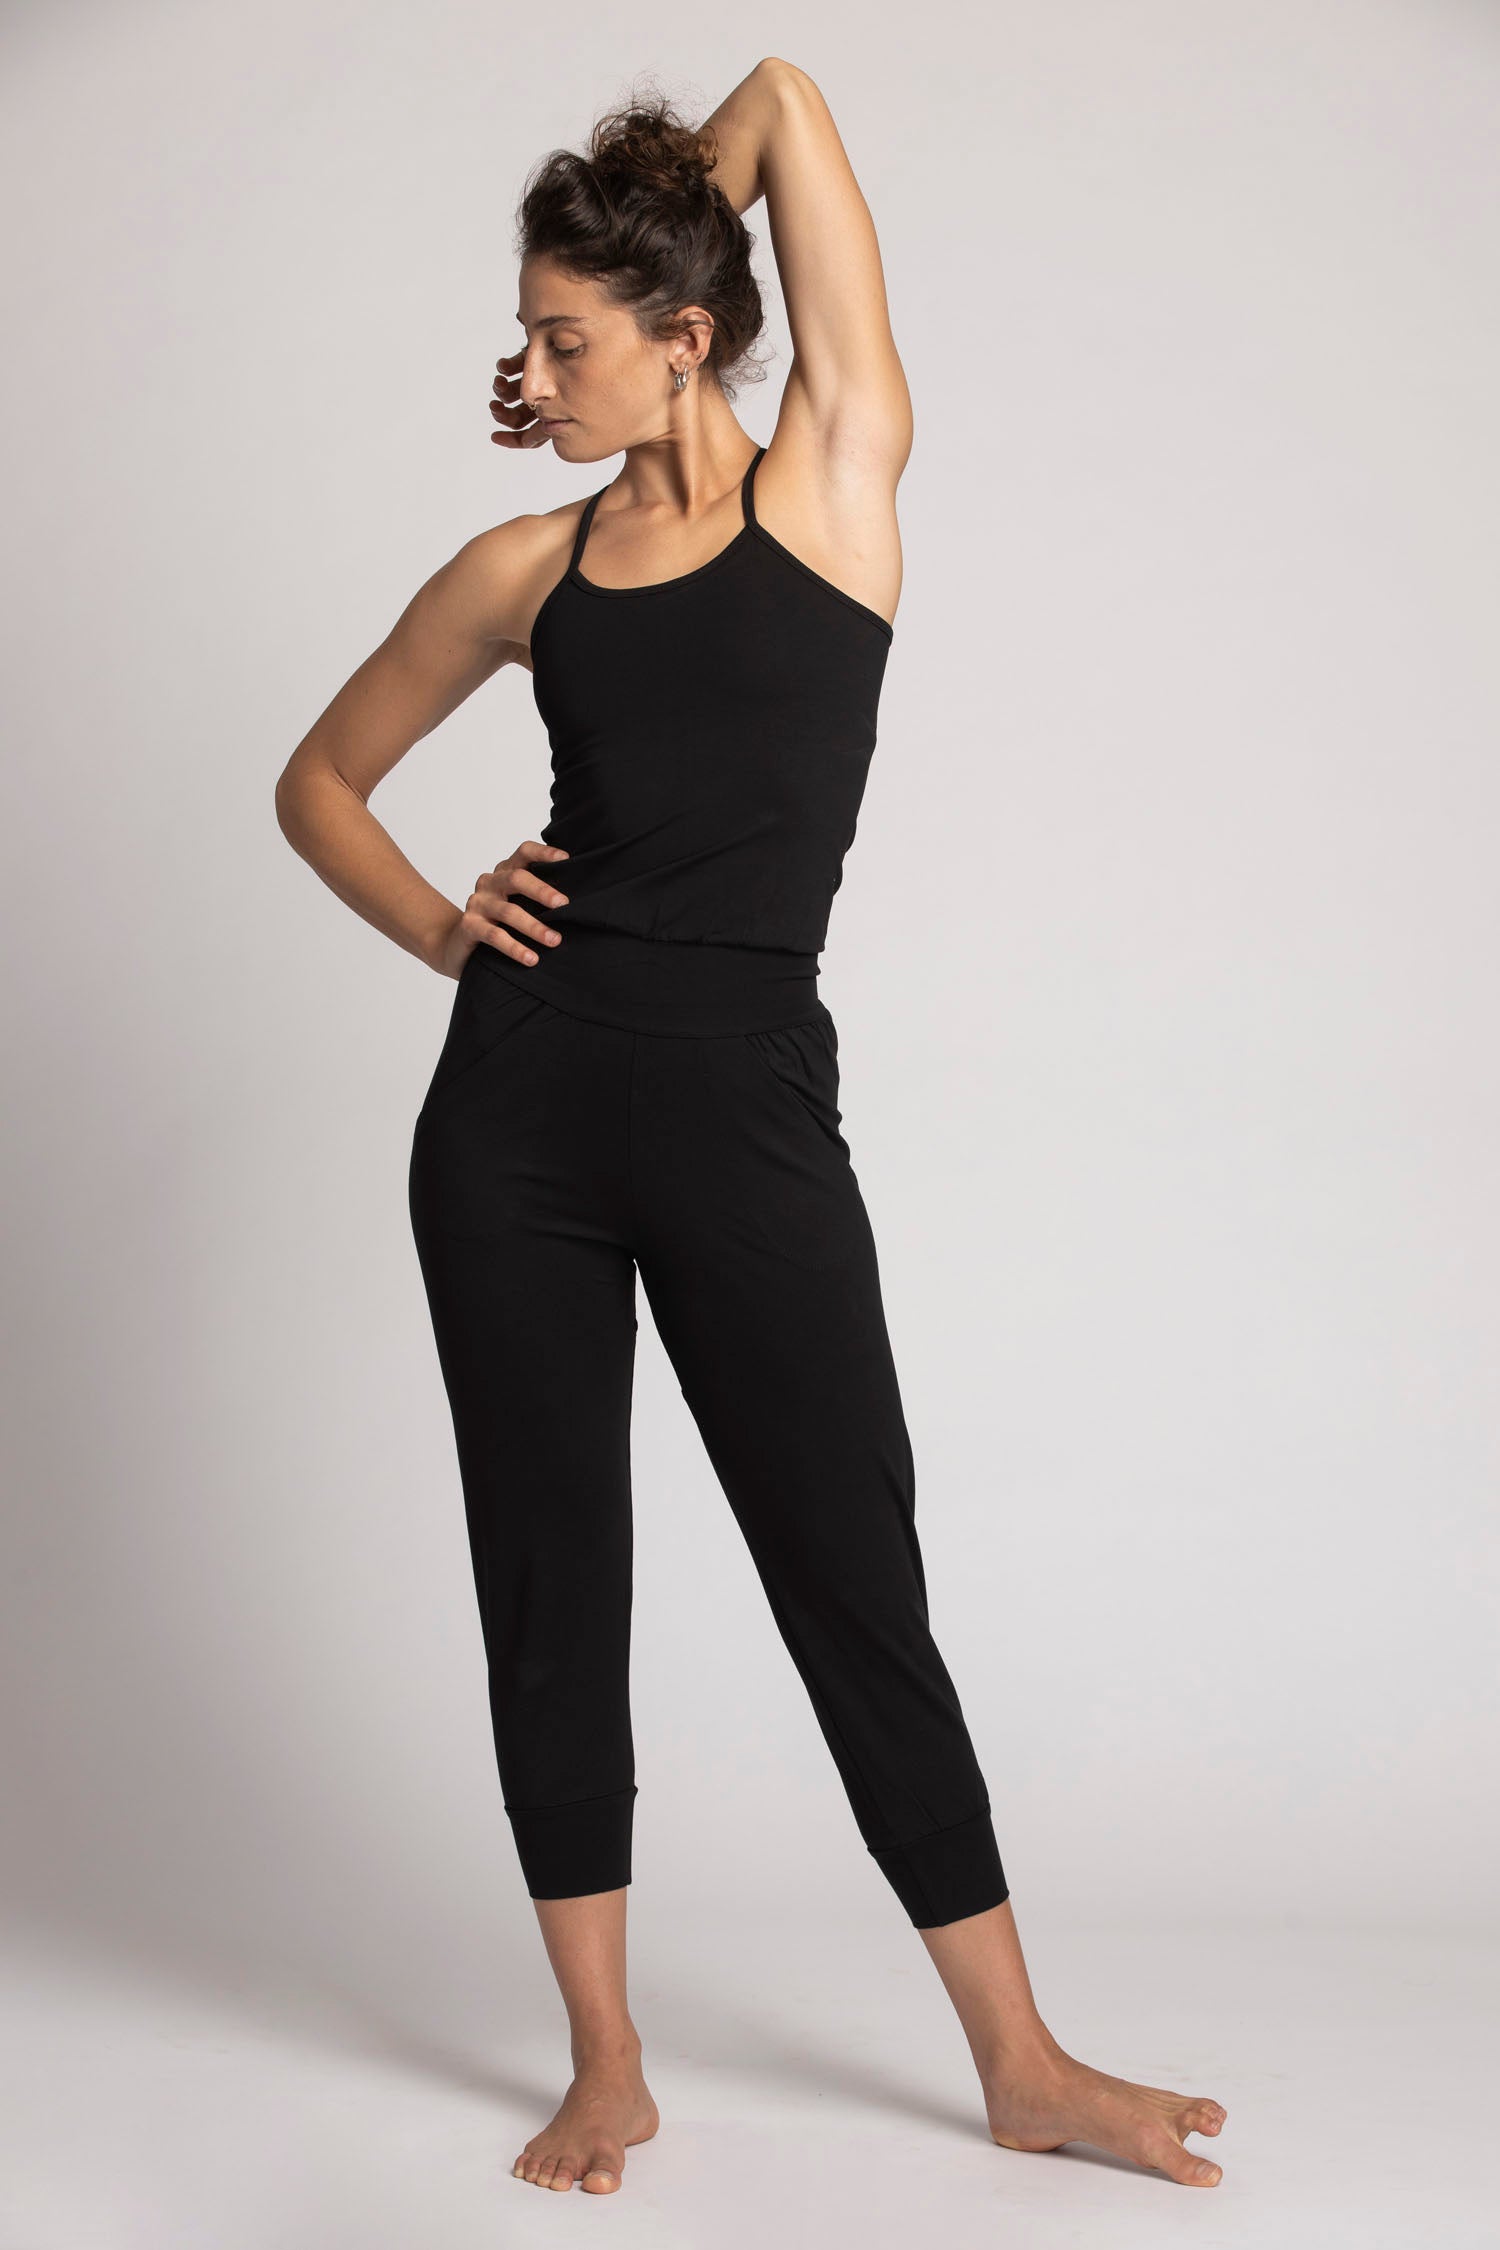 Luxe Natural Yoga Wear  Yoga wear, Fitness fashion, How to wear